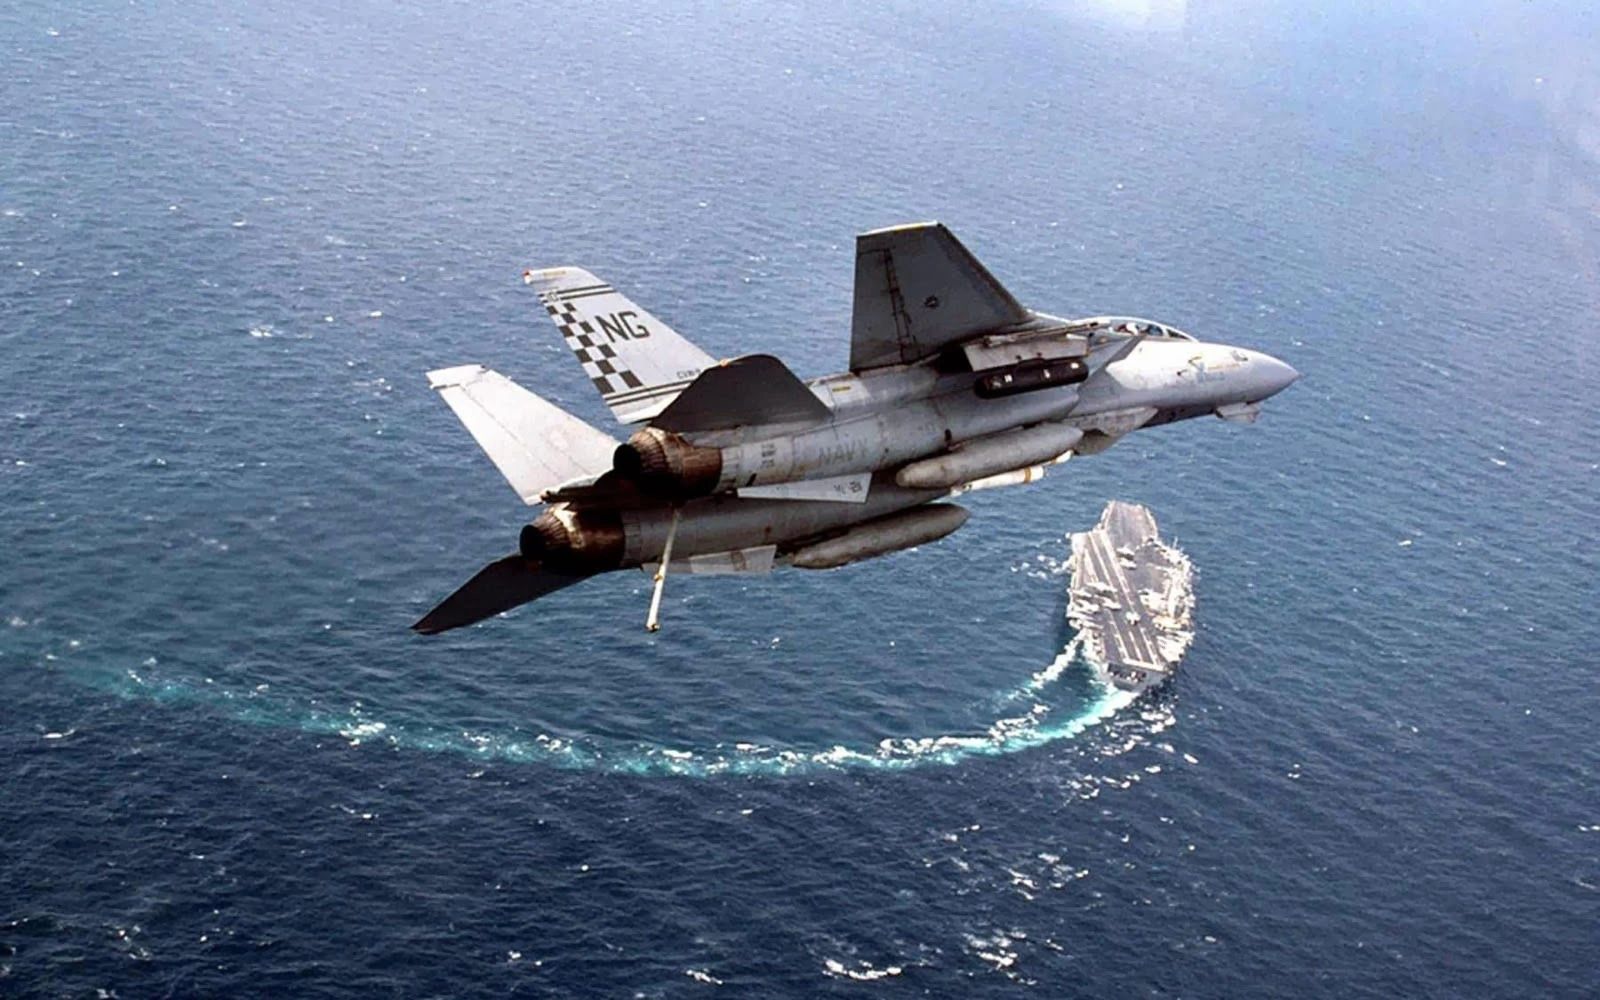 A fighter jet flying over the ocean with a boat in the background.